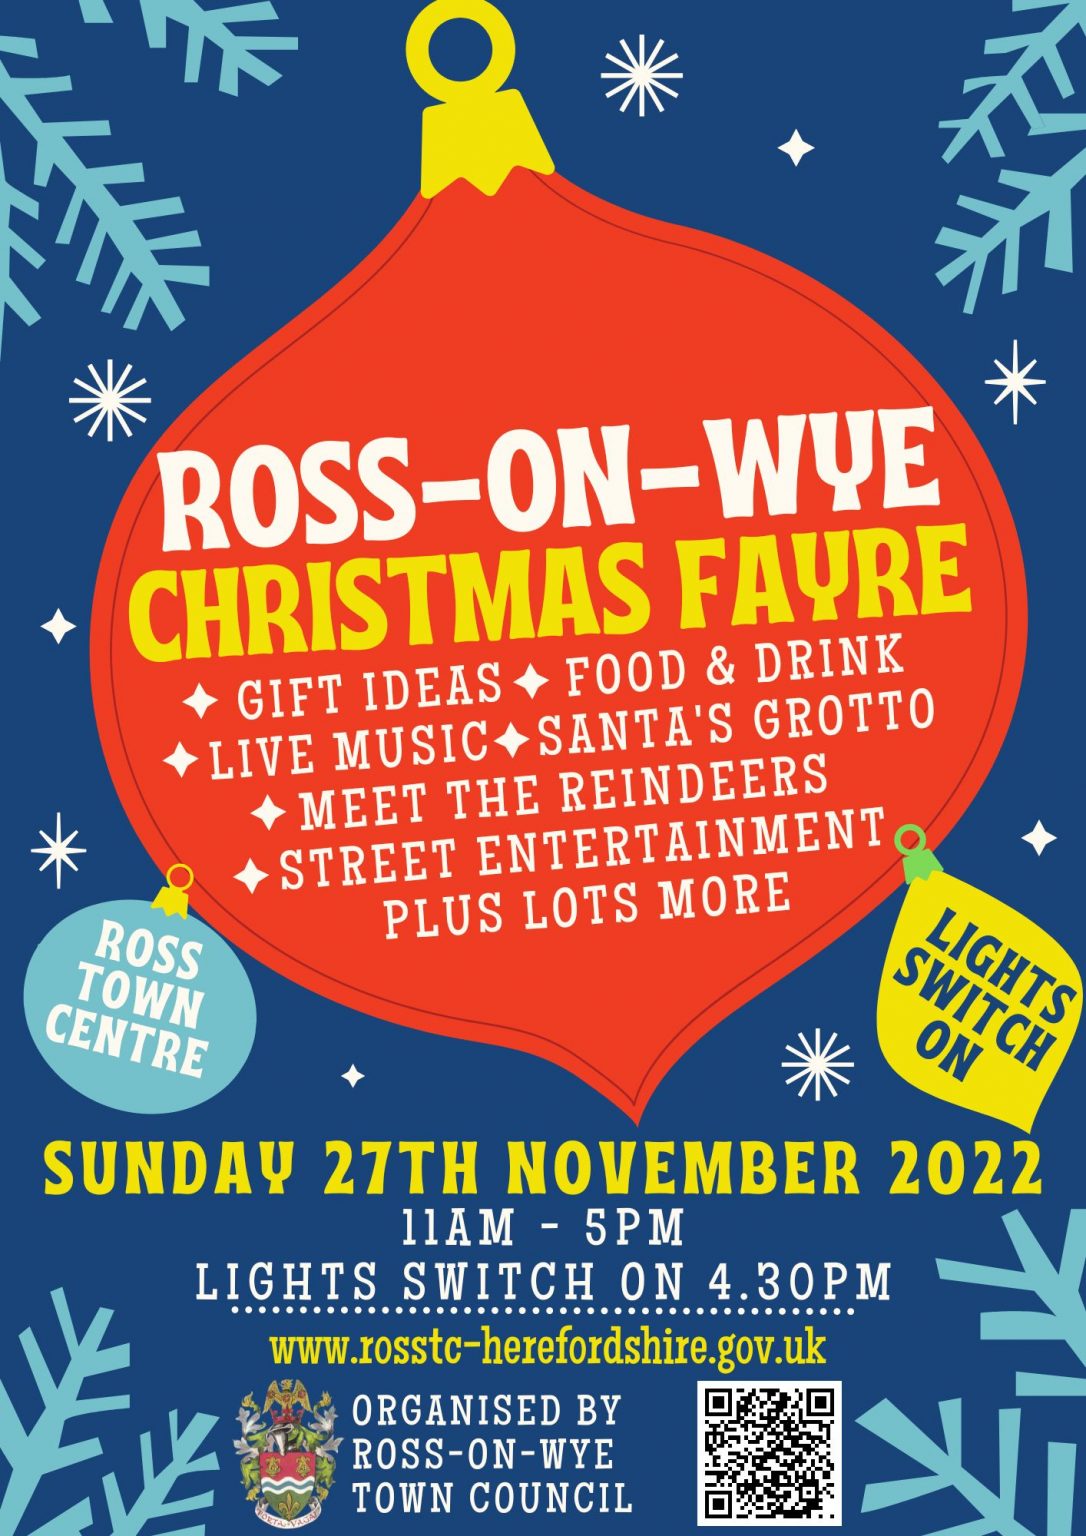 Special Guest announced for this year’s RossonWye Christmas Fayre